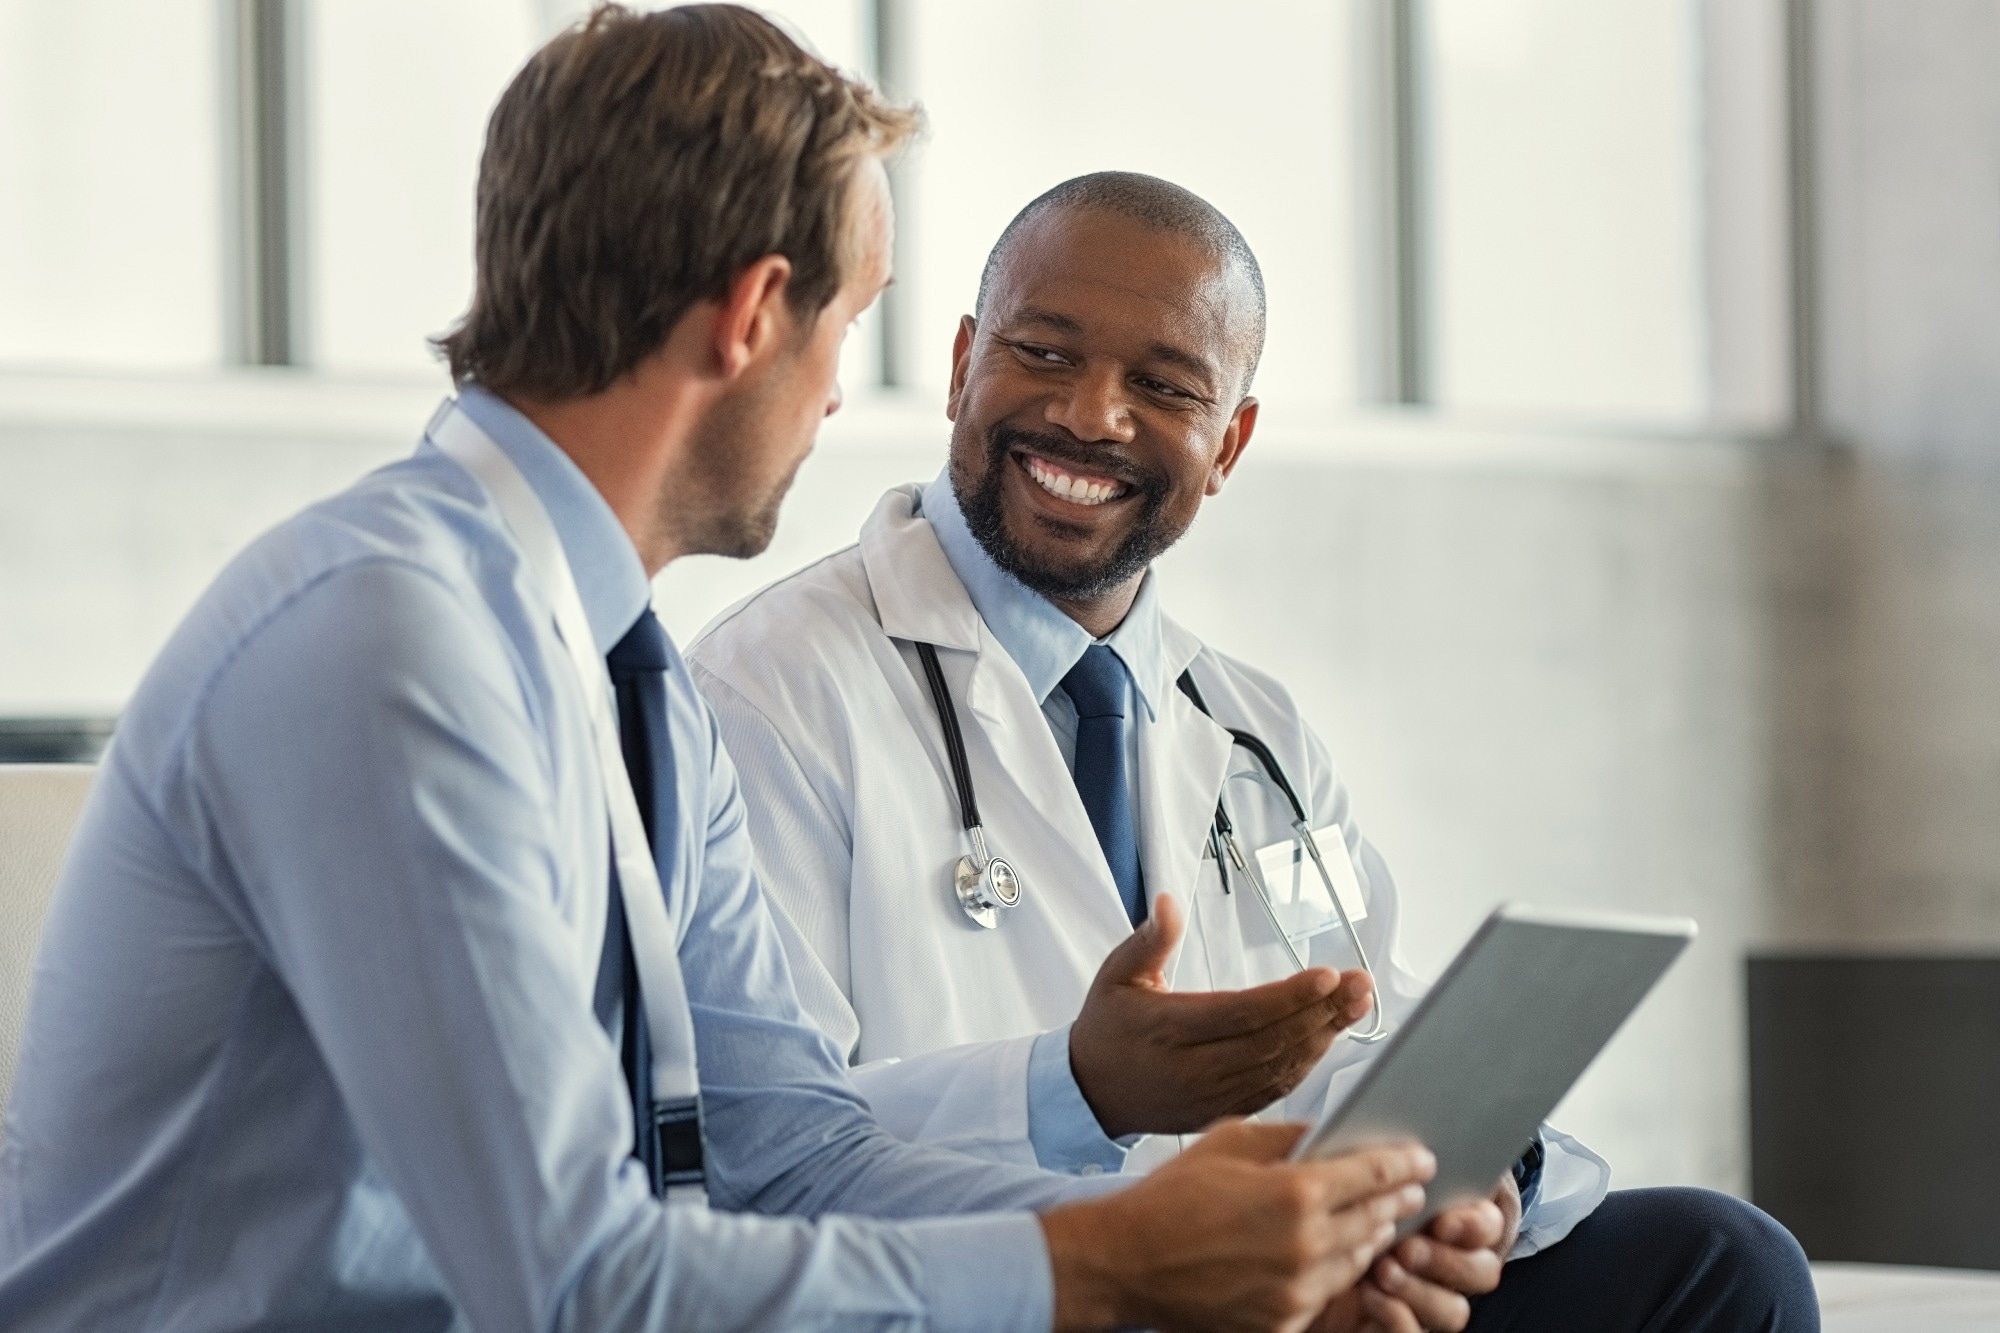 Study: Intersectional Disparities in Emergency Medicine Residents’ Performance Assessments by Race, Ethnicity, and Sex. Image Credit: Ground Picture/Shutterstock.com